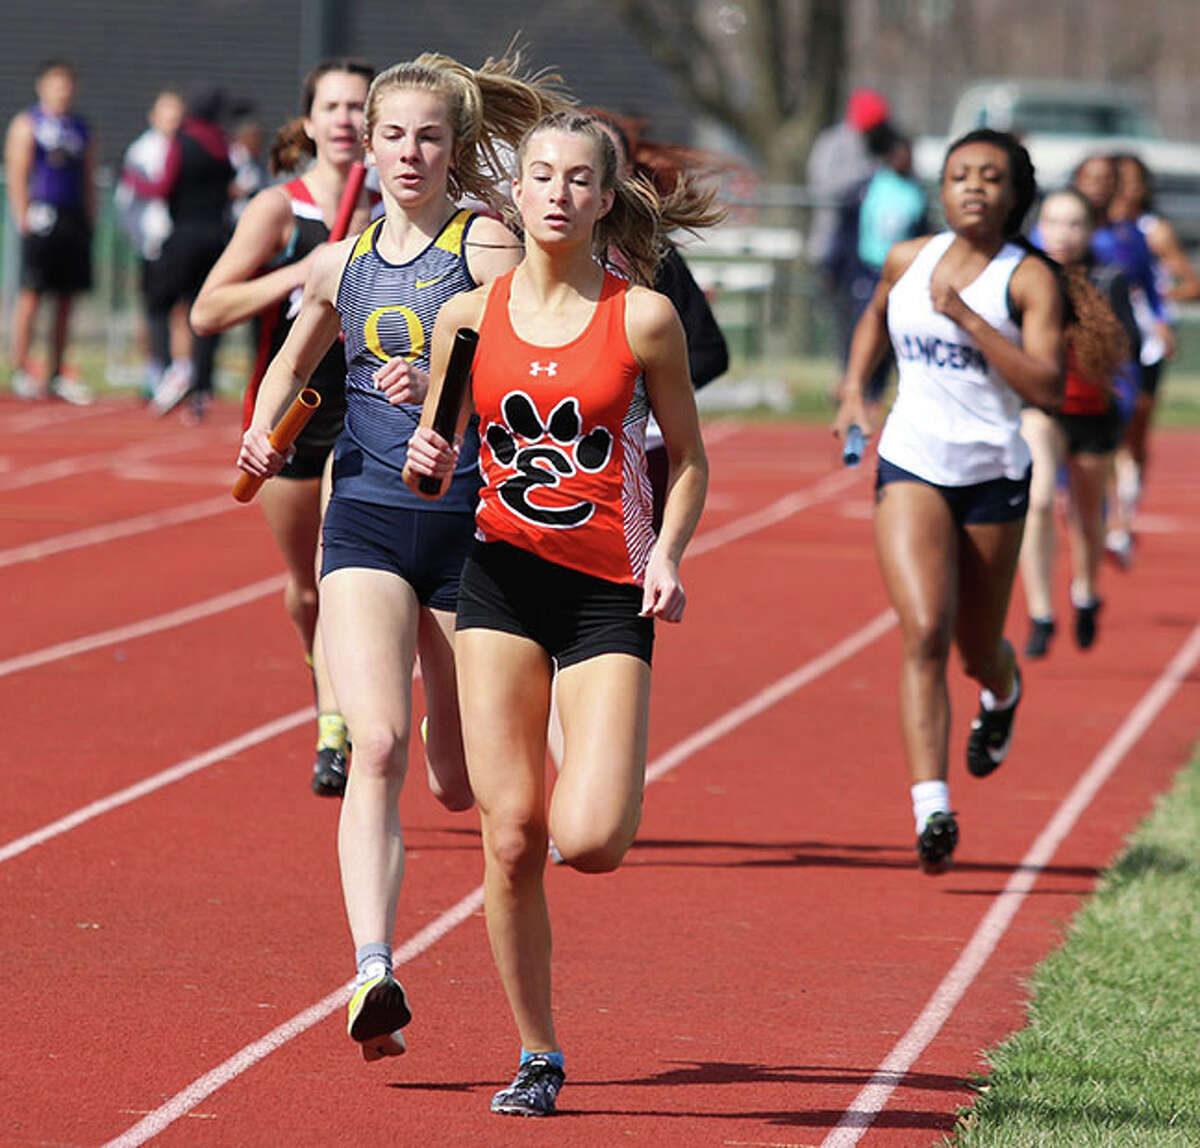 Edwardsville's Maya Lueking runs on the lead with O'Fallon's Peyton Schieppe off her shoulder in the opening lap of the 4x800 relay Friday at the Southwestern Illinois Relays at Winston Brown Track and Field Complex in Edwardsville. On Saturday, Lueking ran a leg with three different teammates in the 4x800 and placed fourth at the Top Times state meet in Bloomington.